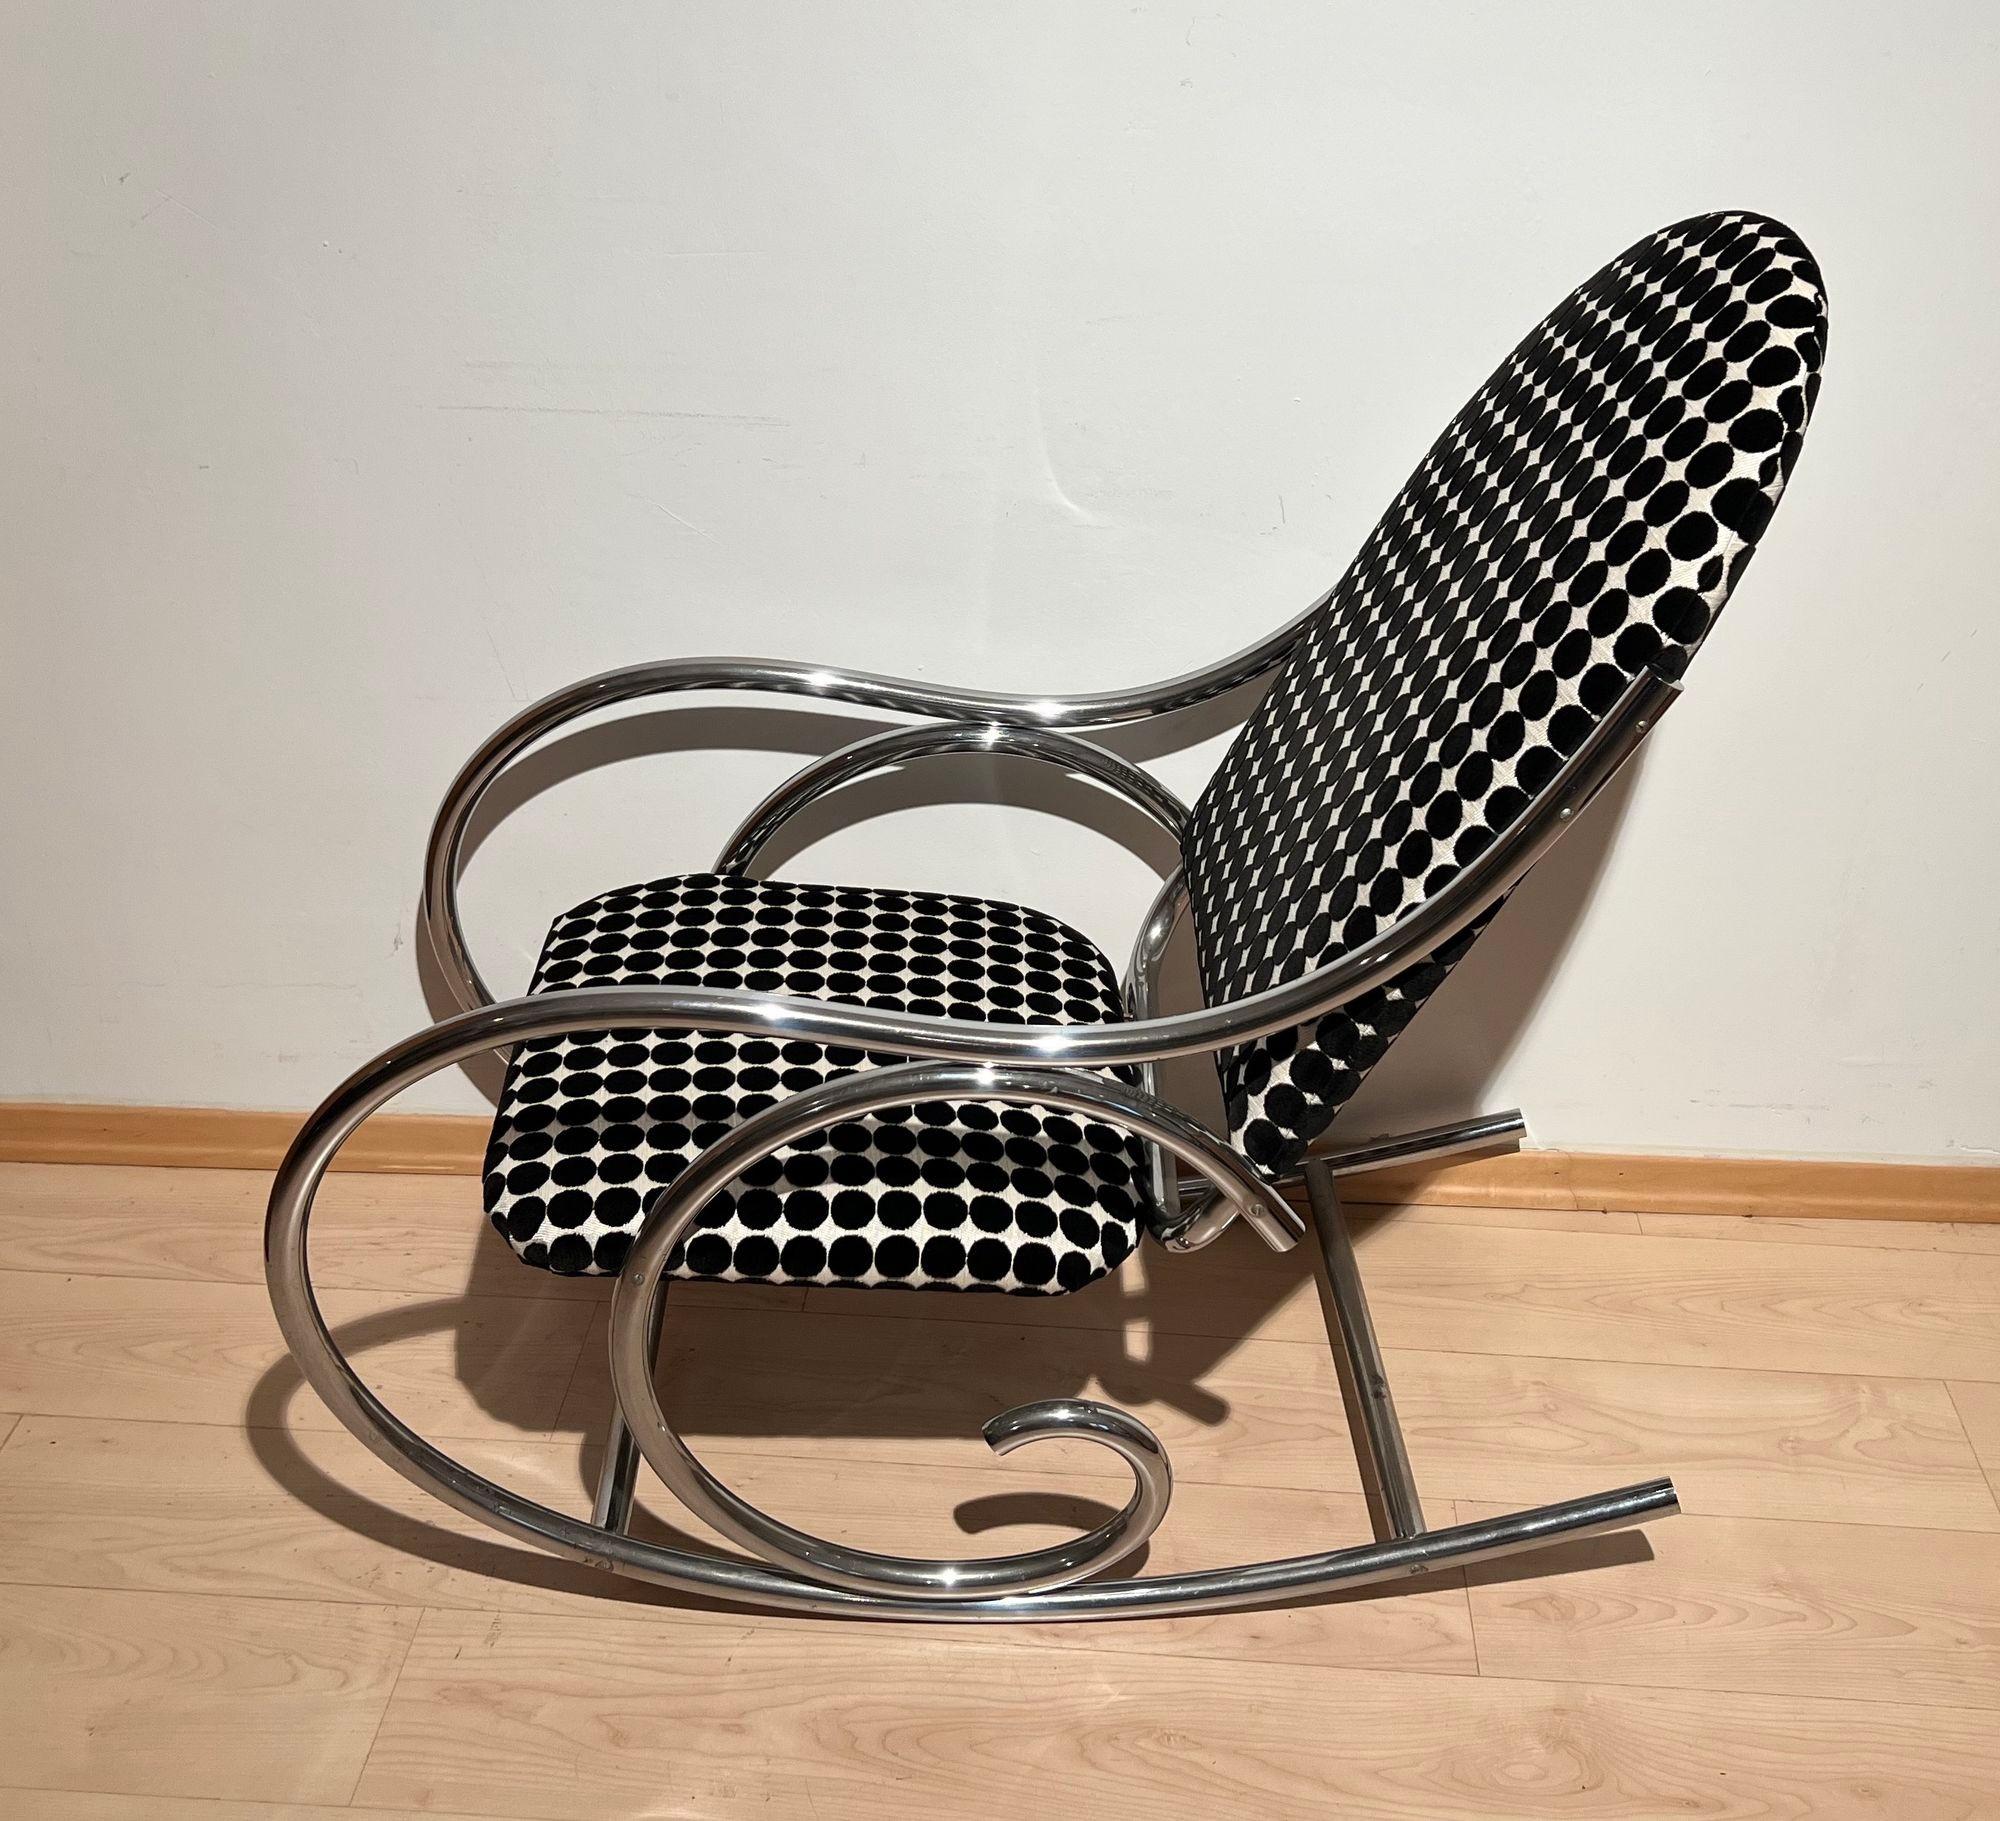 Polished Bauhaus Rocking Chair, Chromed Steeltubes, Germany, circa 1930 For Sale